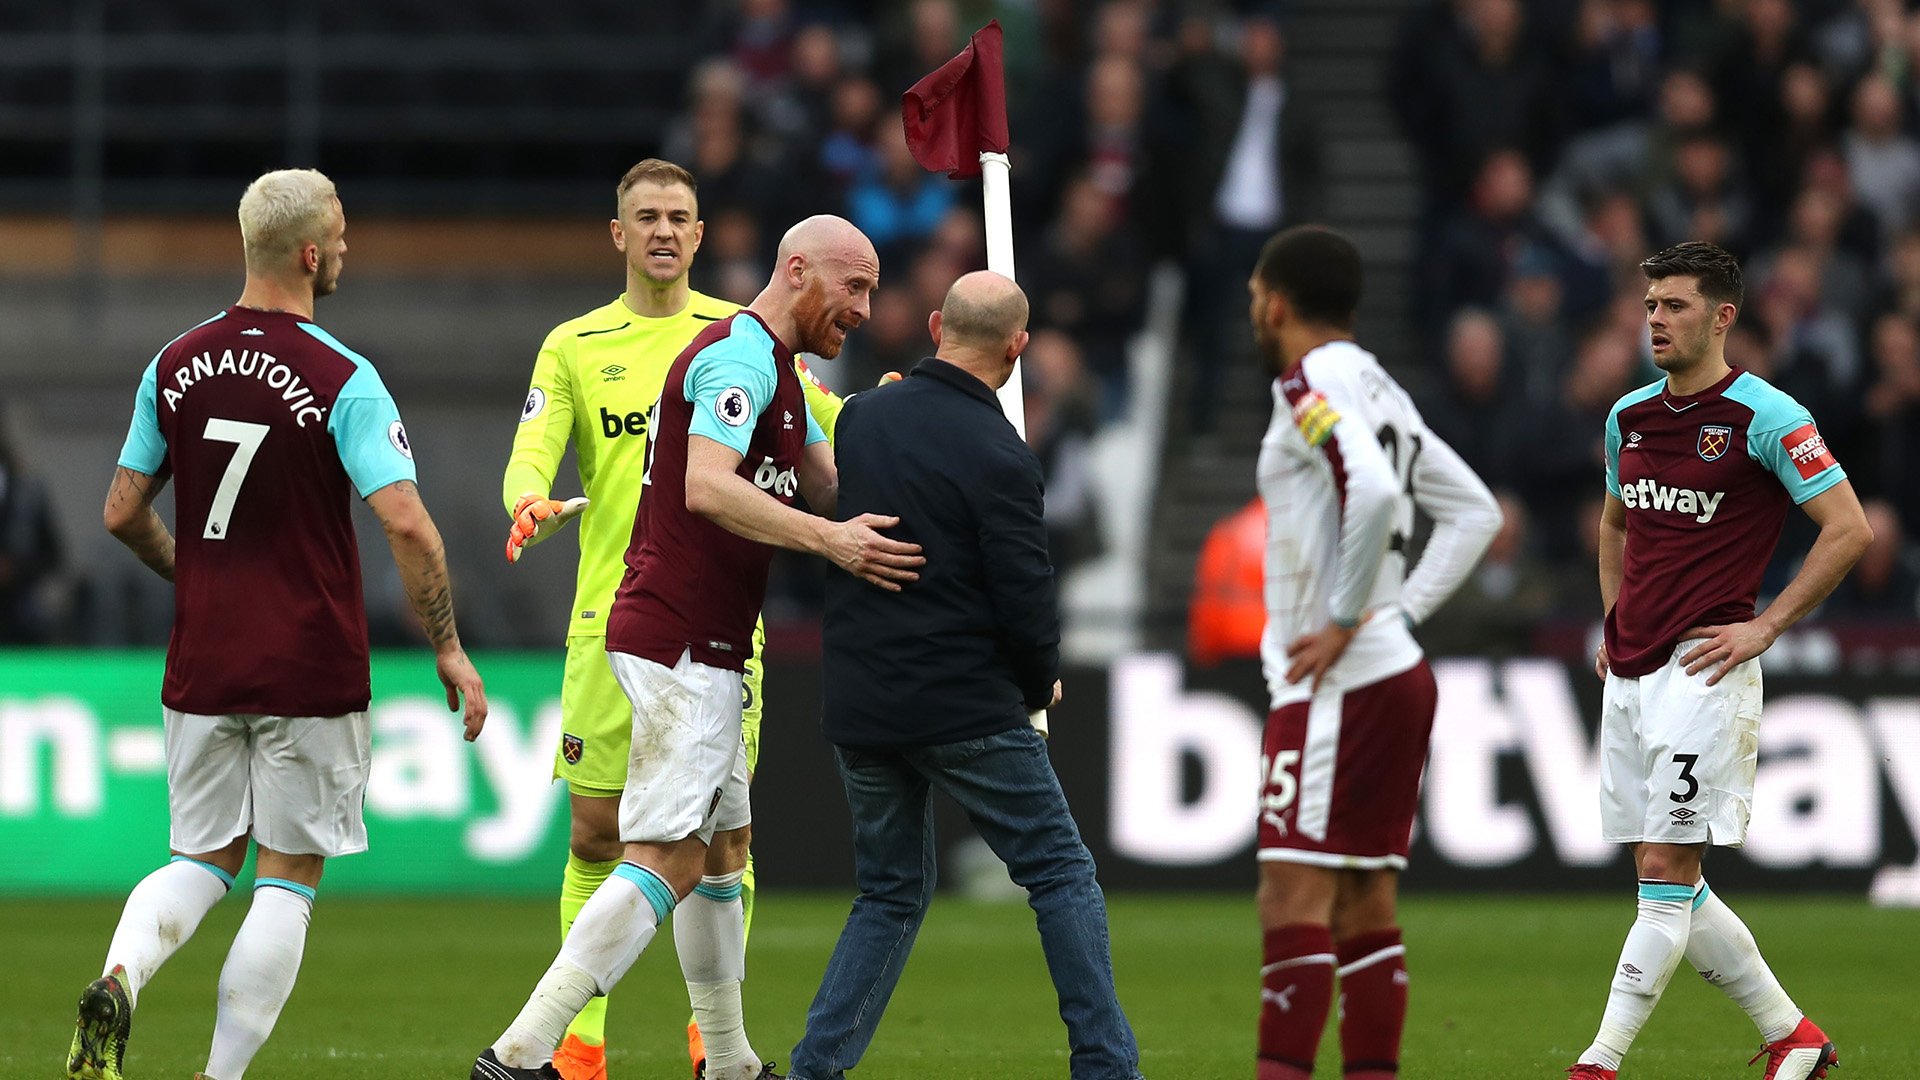 Sports-Specific Criminal Provisions Contravened In The Match Between West Ham United V. Burnley,  And The Likely Punishments.